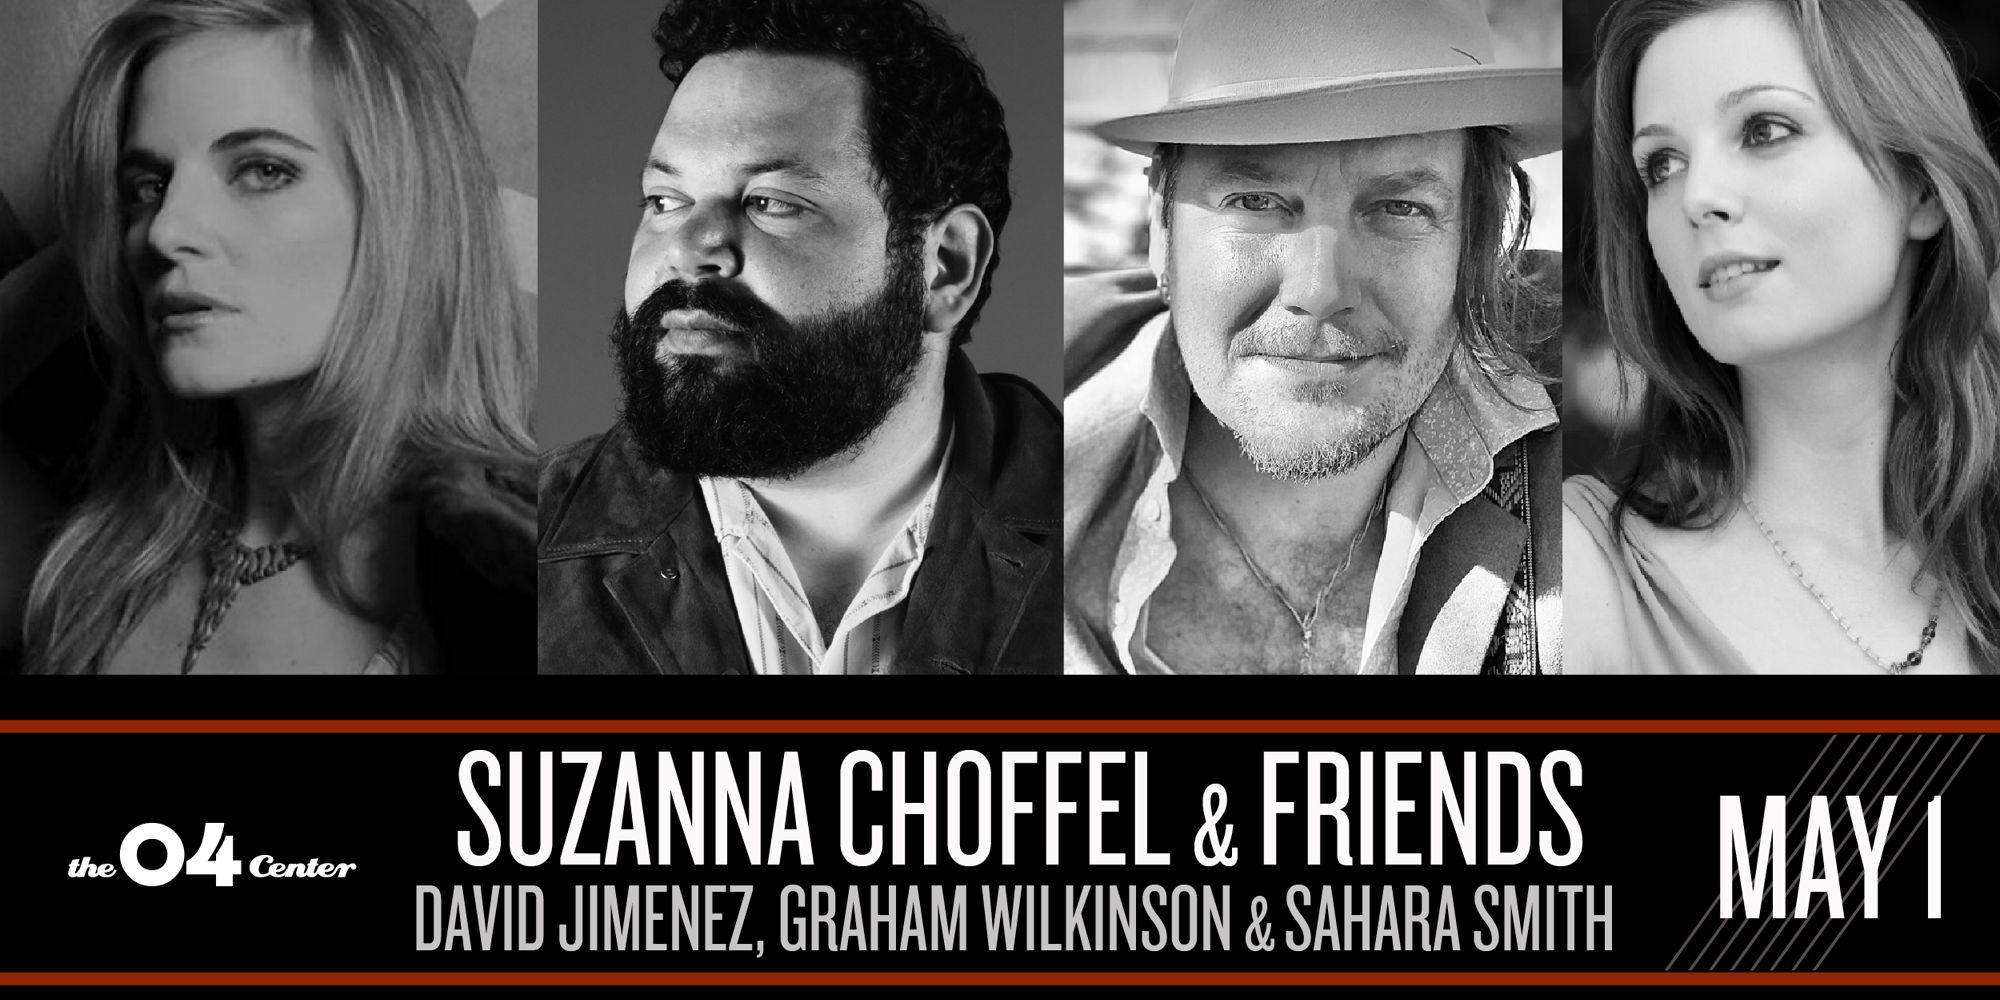 Suzanna Choffel & Friends promotional image